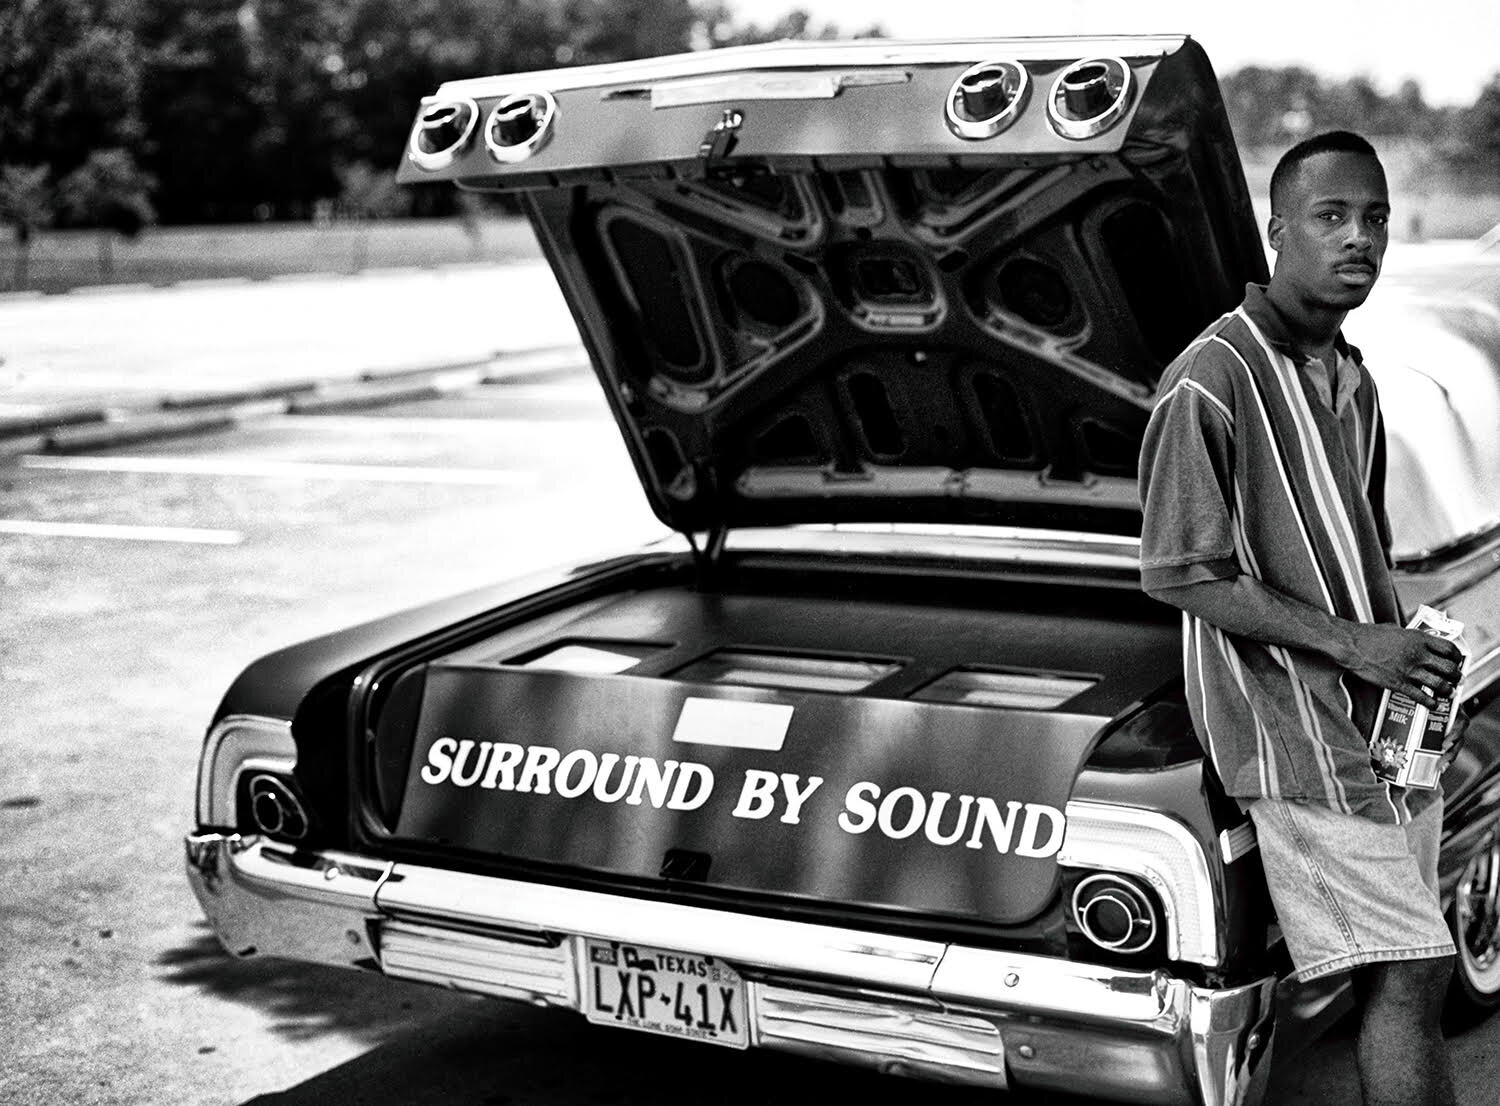   Surround by Sound  (from  Hip Hop  series), 1995 Edition: 1/7 Inkjet print 20 x 15 in. (image size)  The Do Good Fund, Inc., 2021-003 